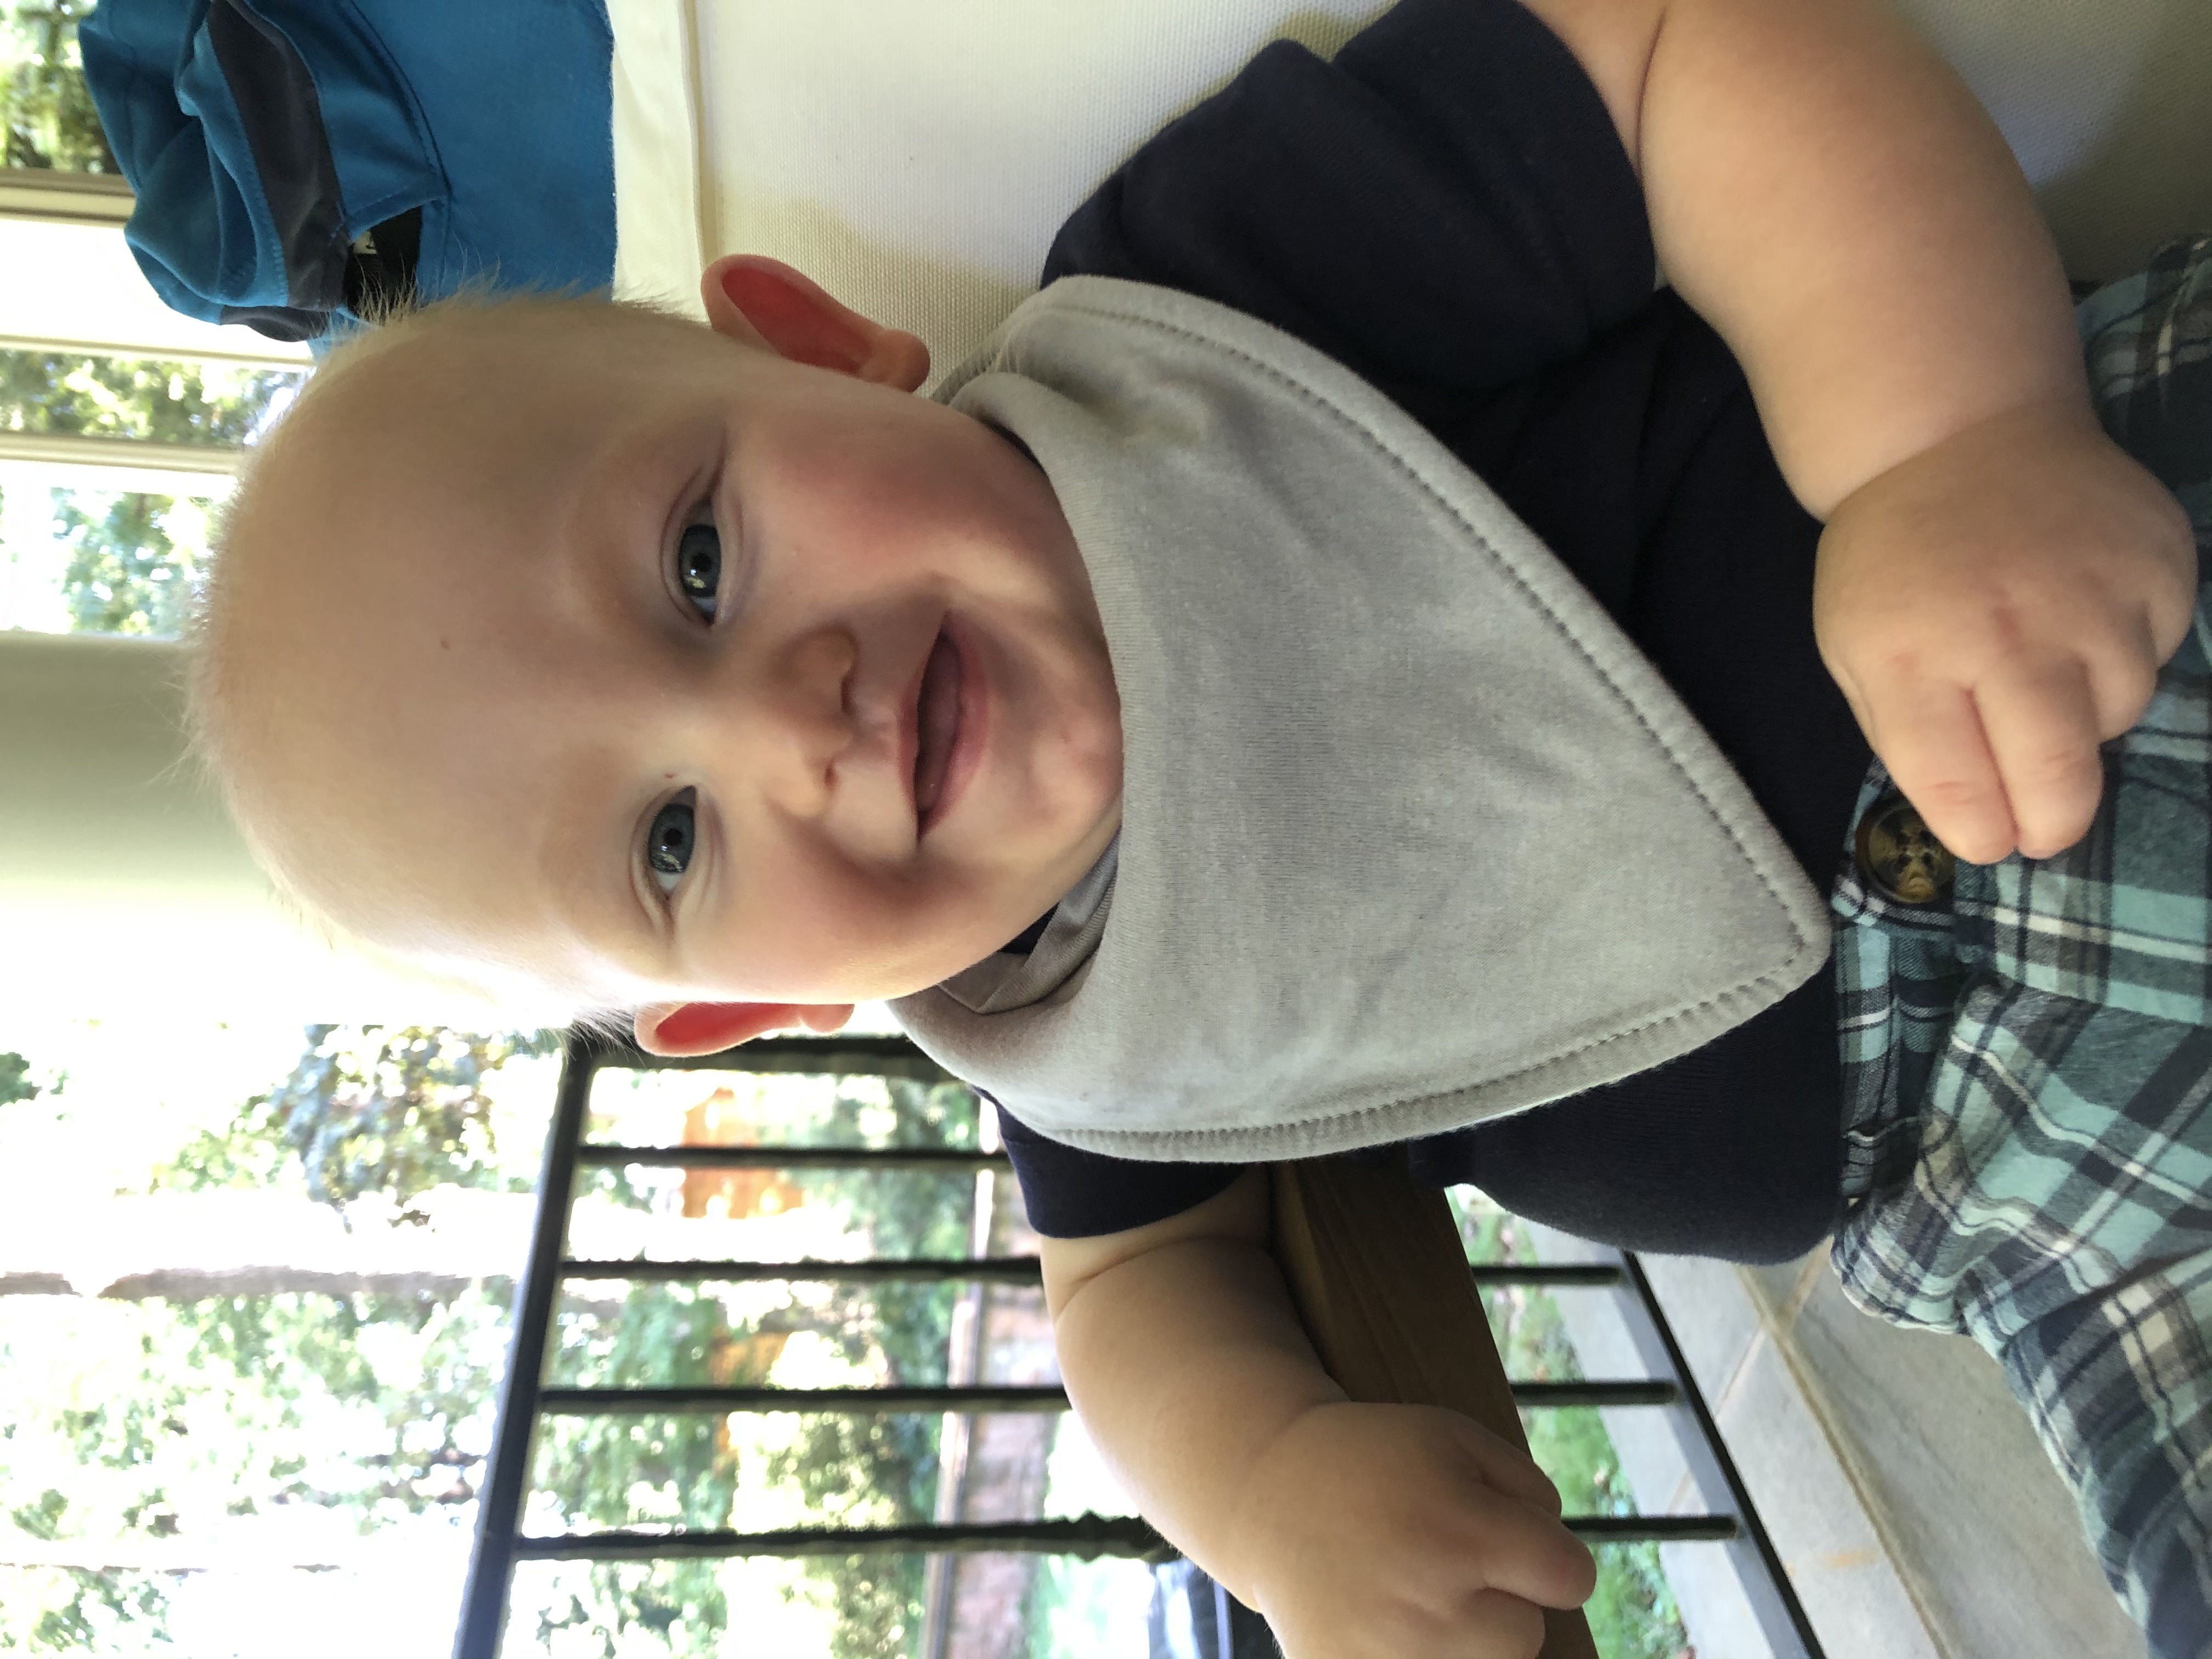 Miles Kallen smiling at 6 months of age